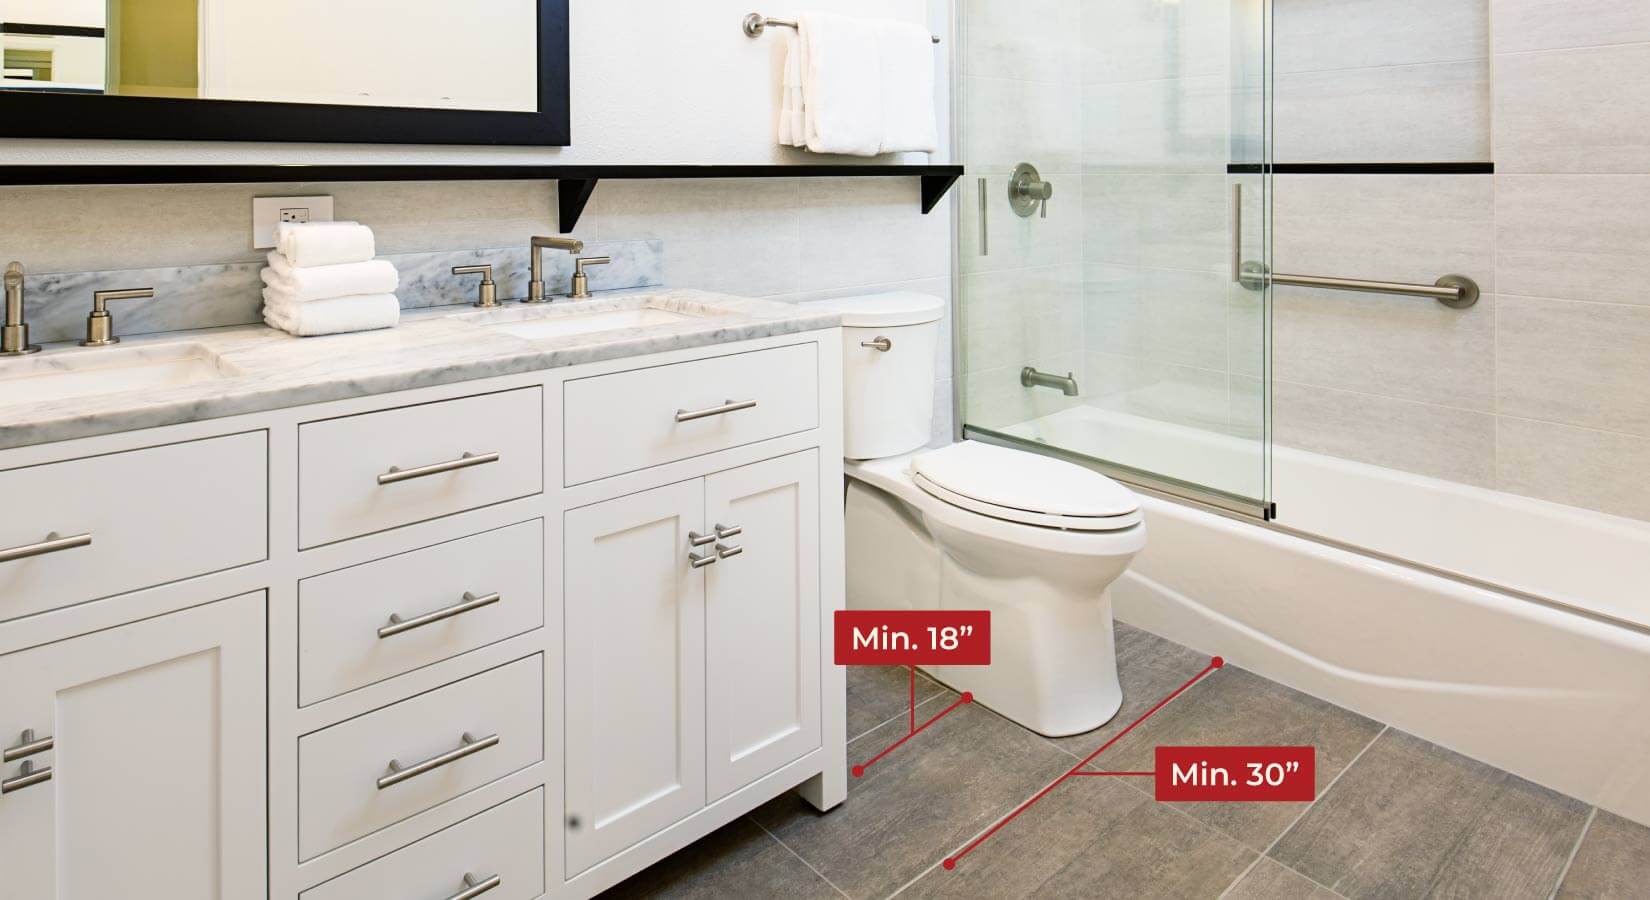 Bathroom layout with minimum 18 inches labeled from vanity to toiled and minimum 30 inches labeled from shower to vanity.